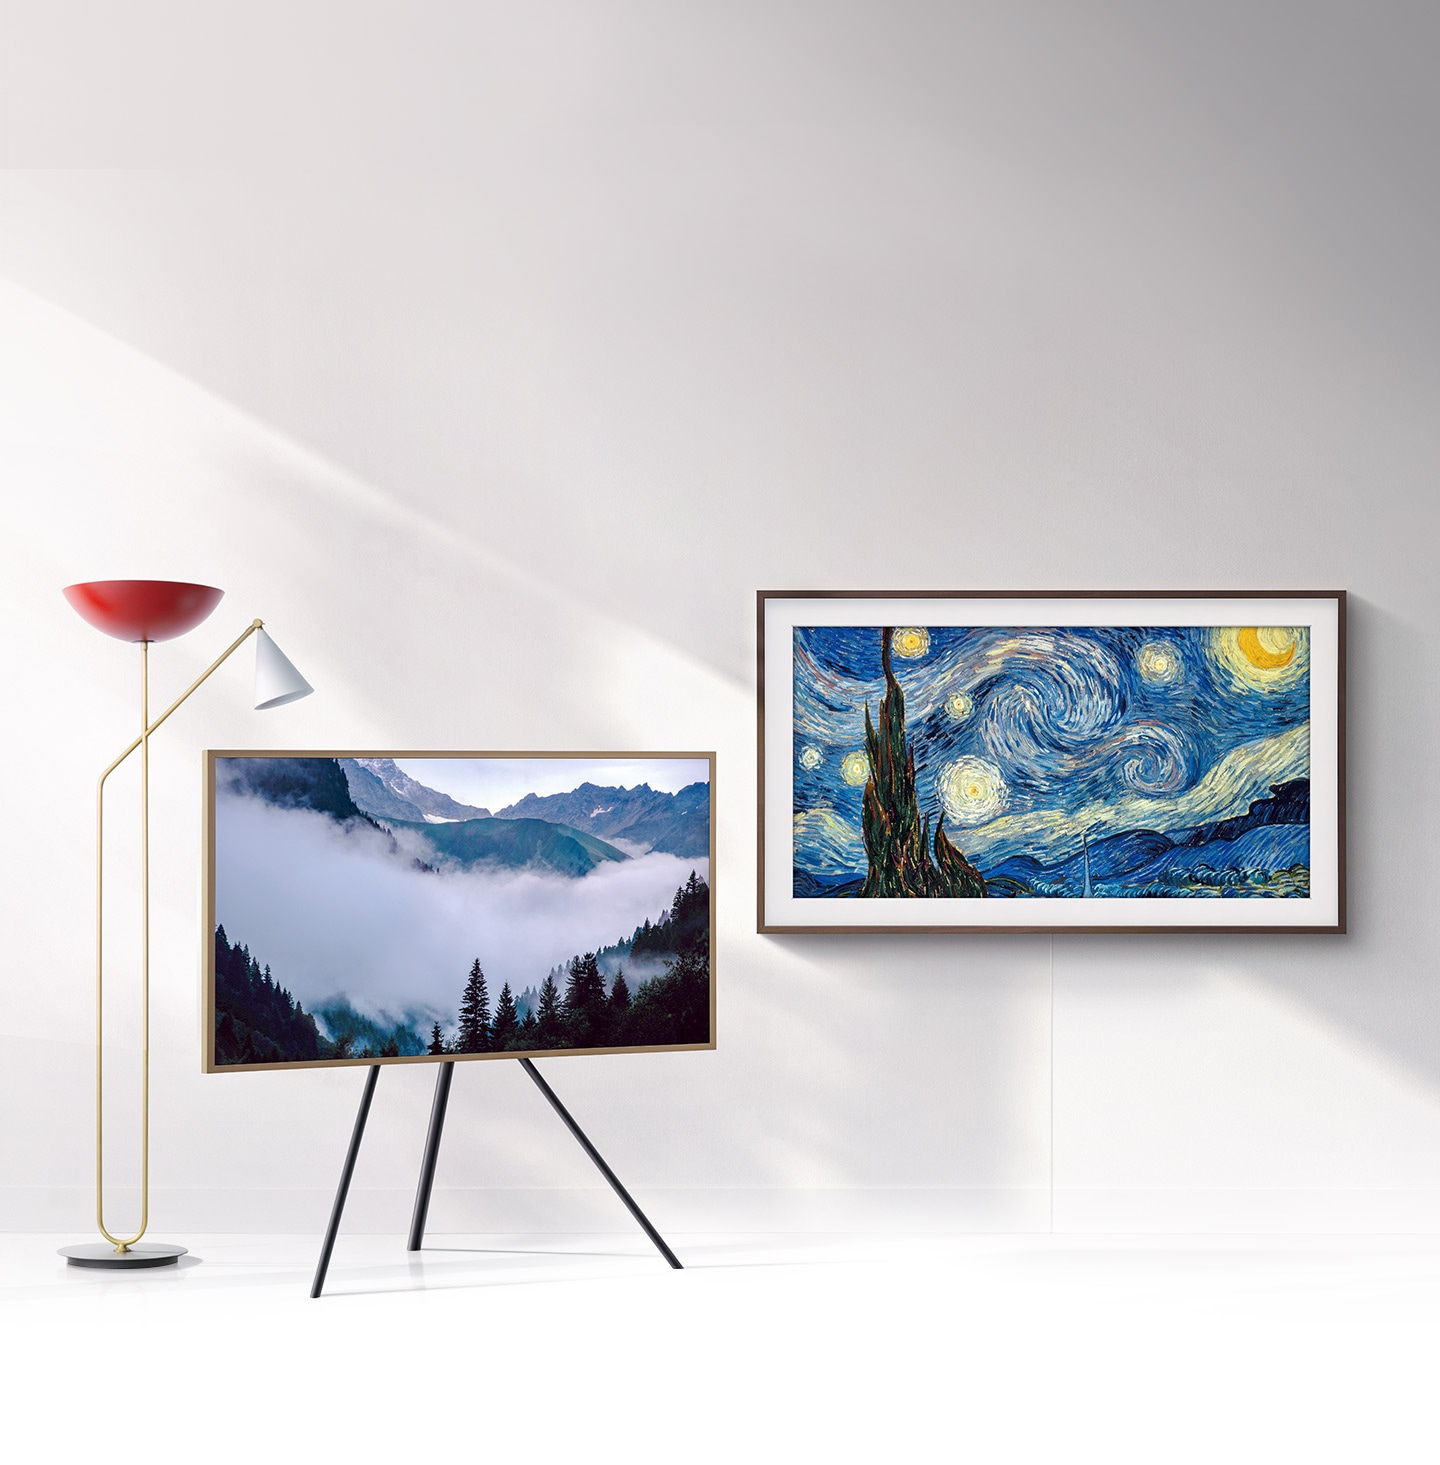 Beautify your space with a personalised gallery